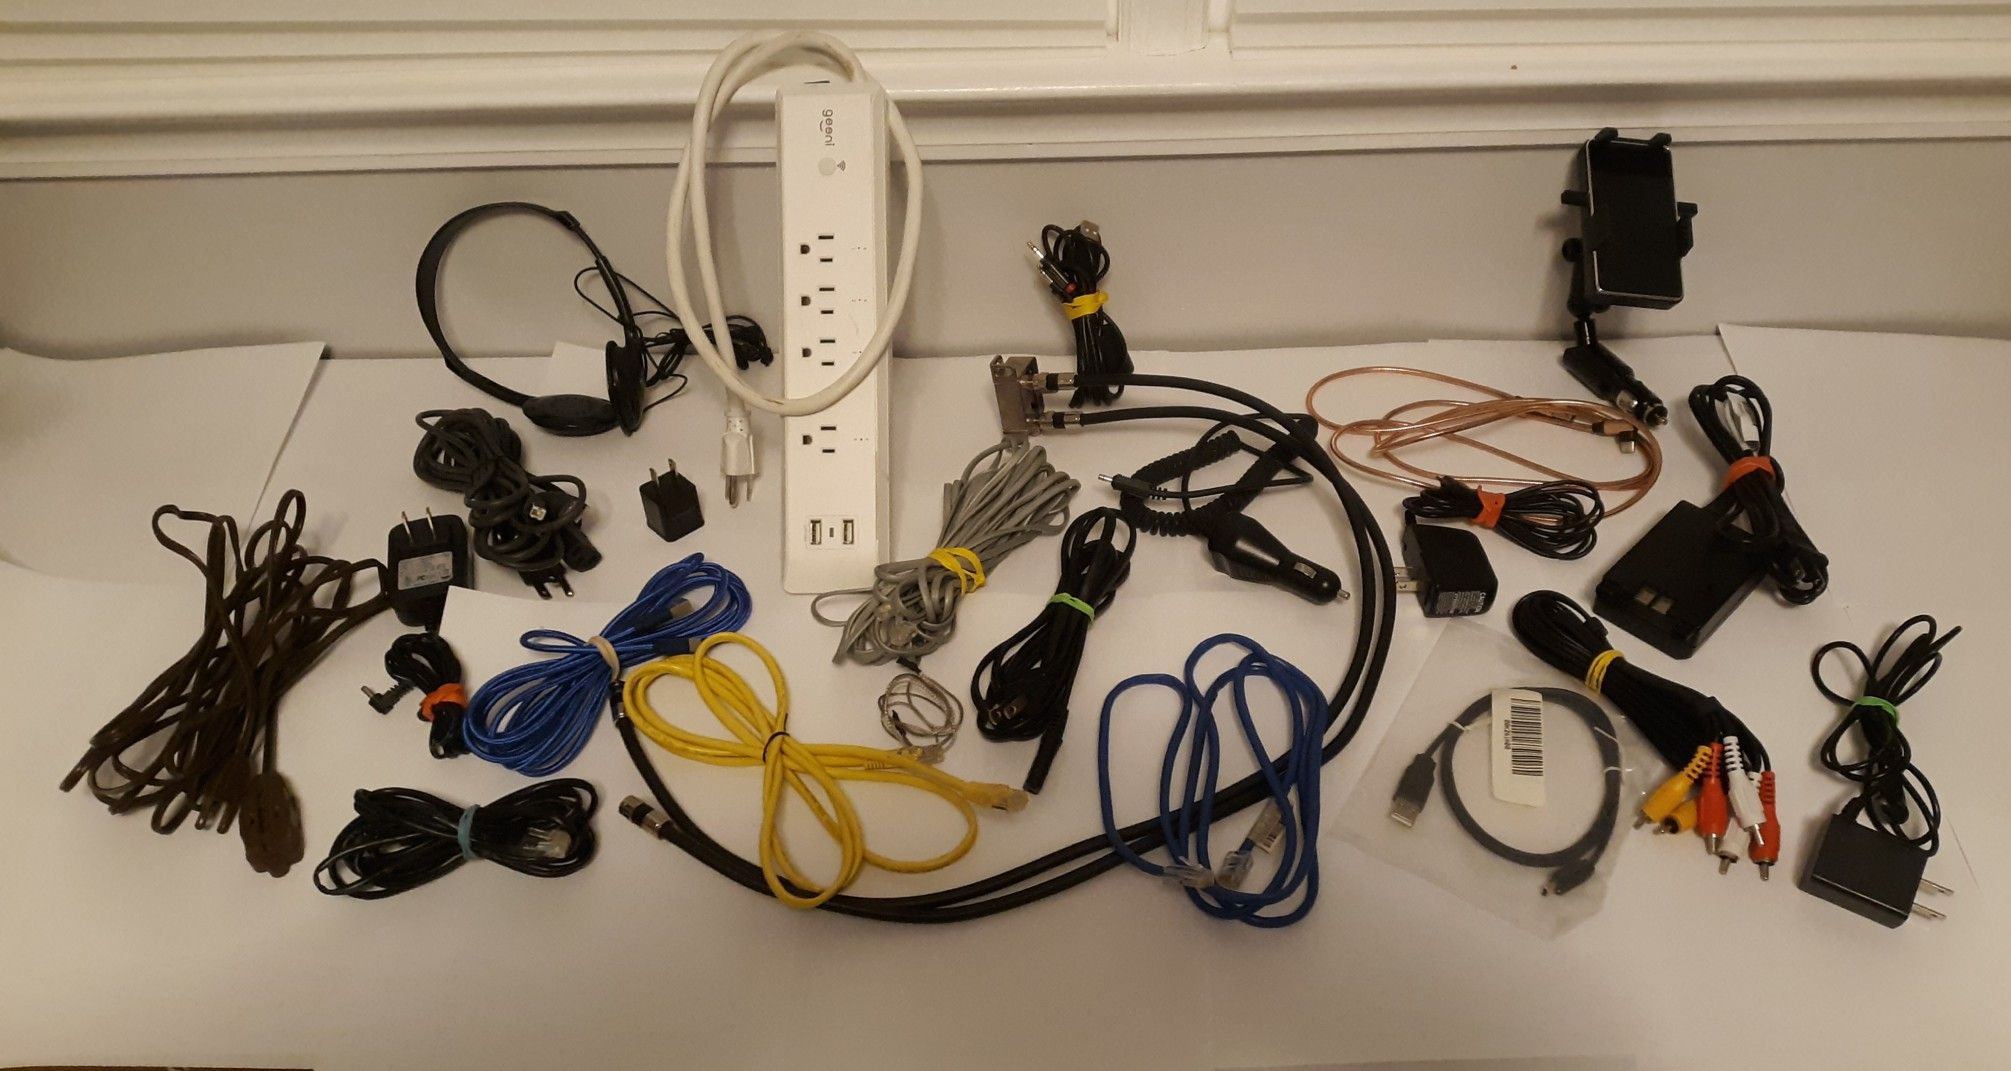 Assorted Electrical Cables, Wires, and Plugs